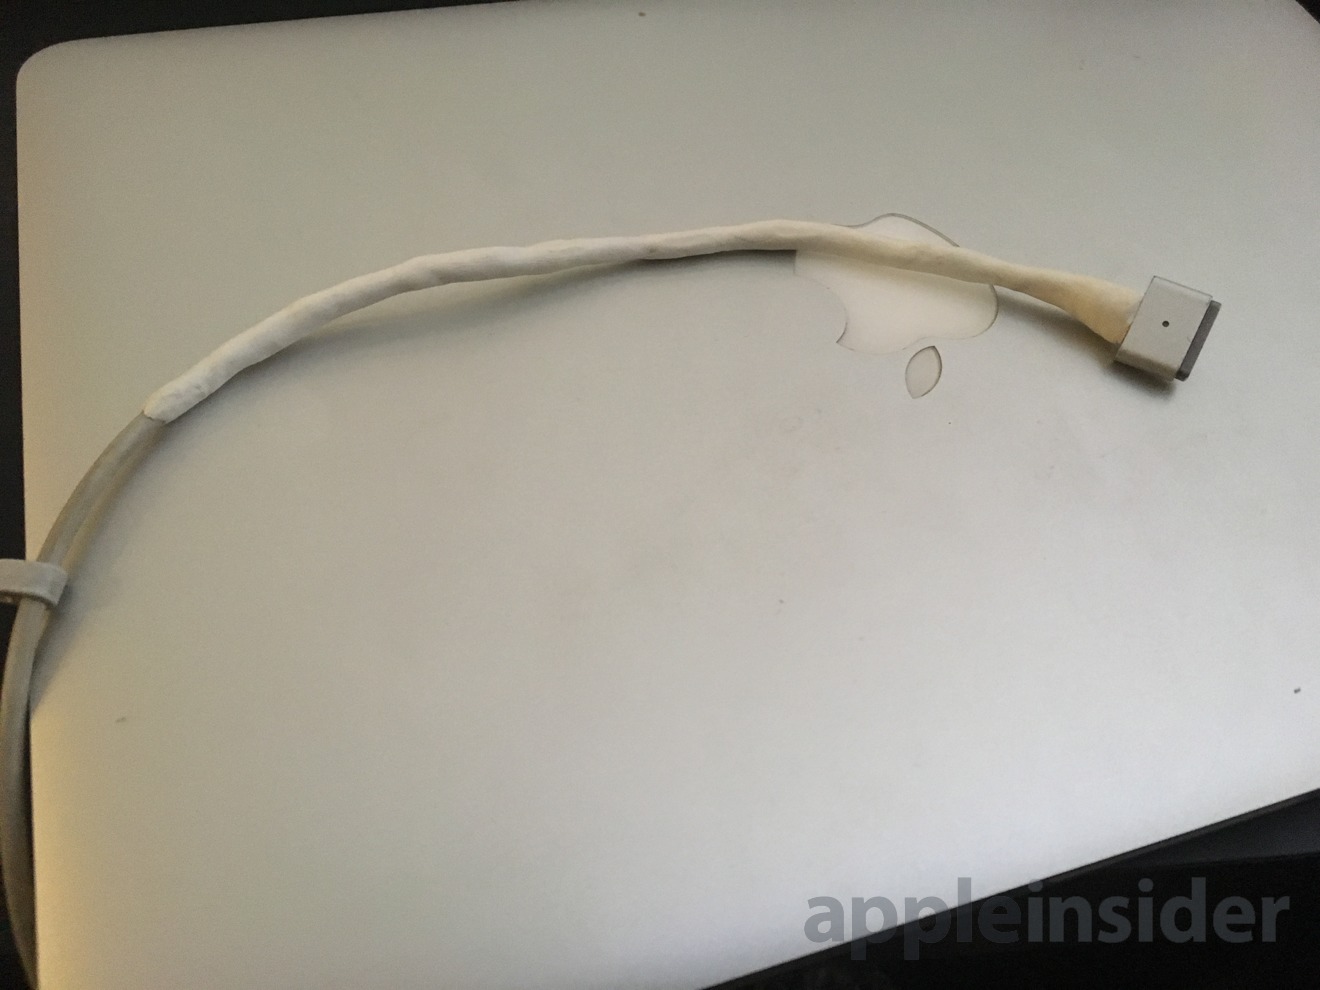 Fix your frayed Apple or Lightning cables with Sugru Moldable Glue [u] | AppleInsider